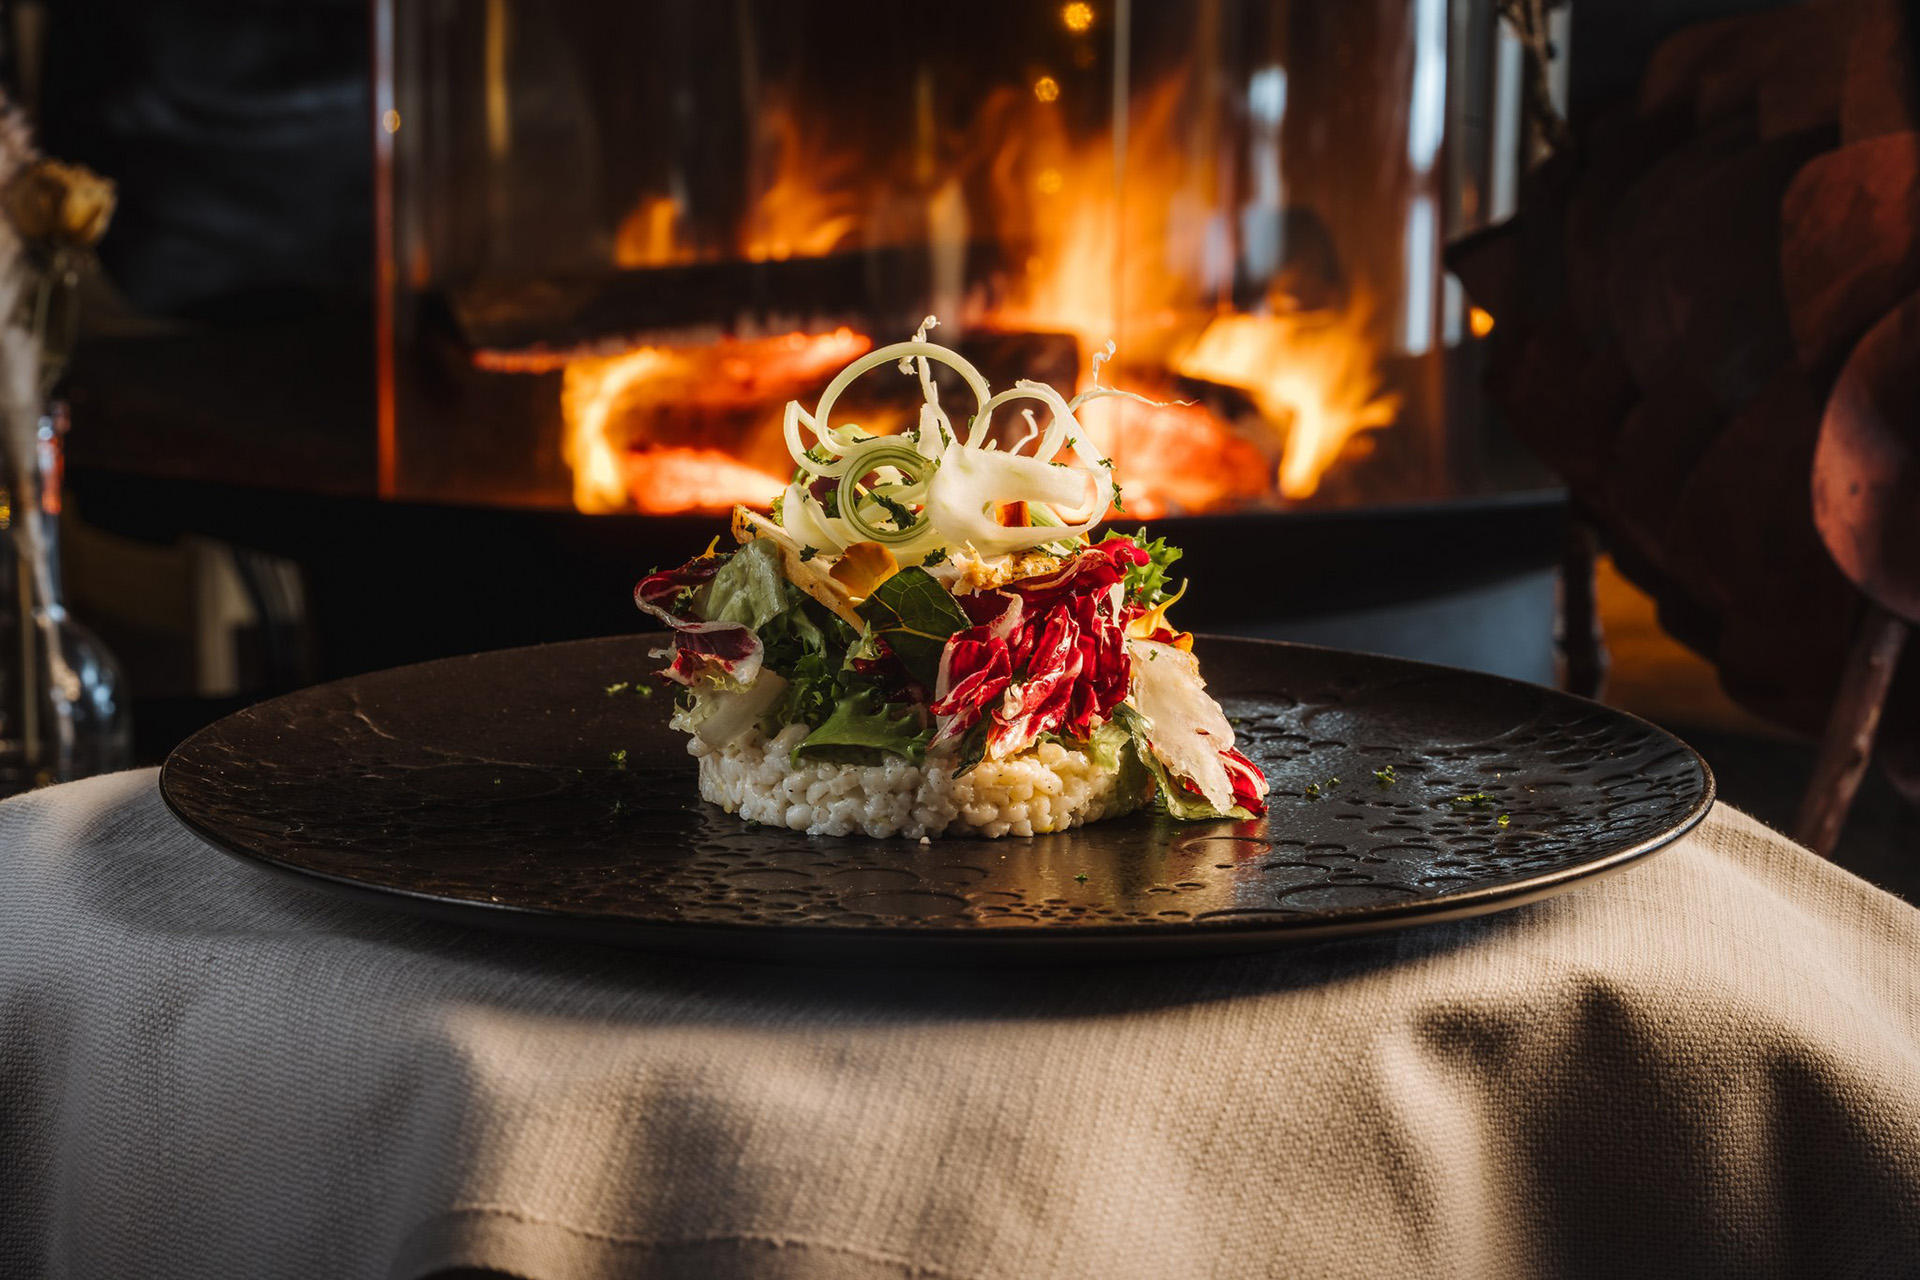 Dish from Rakas winter menu in front of the fireplace.